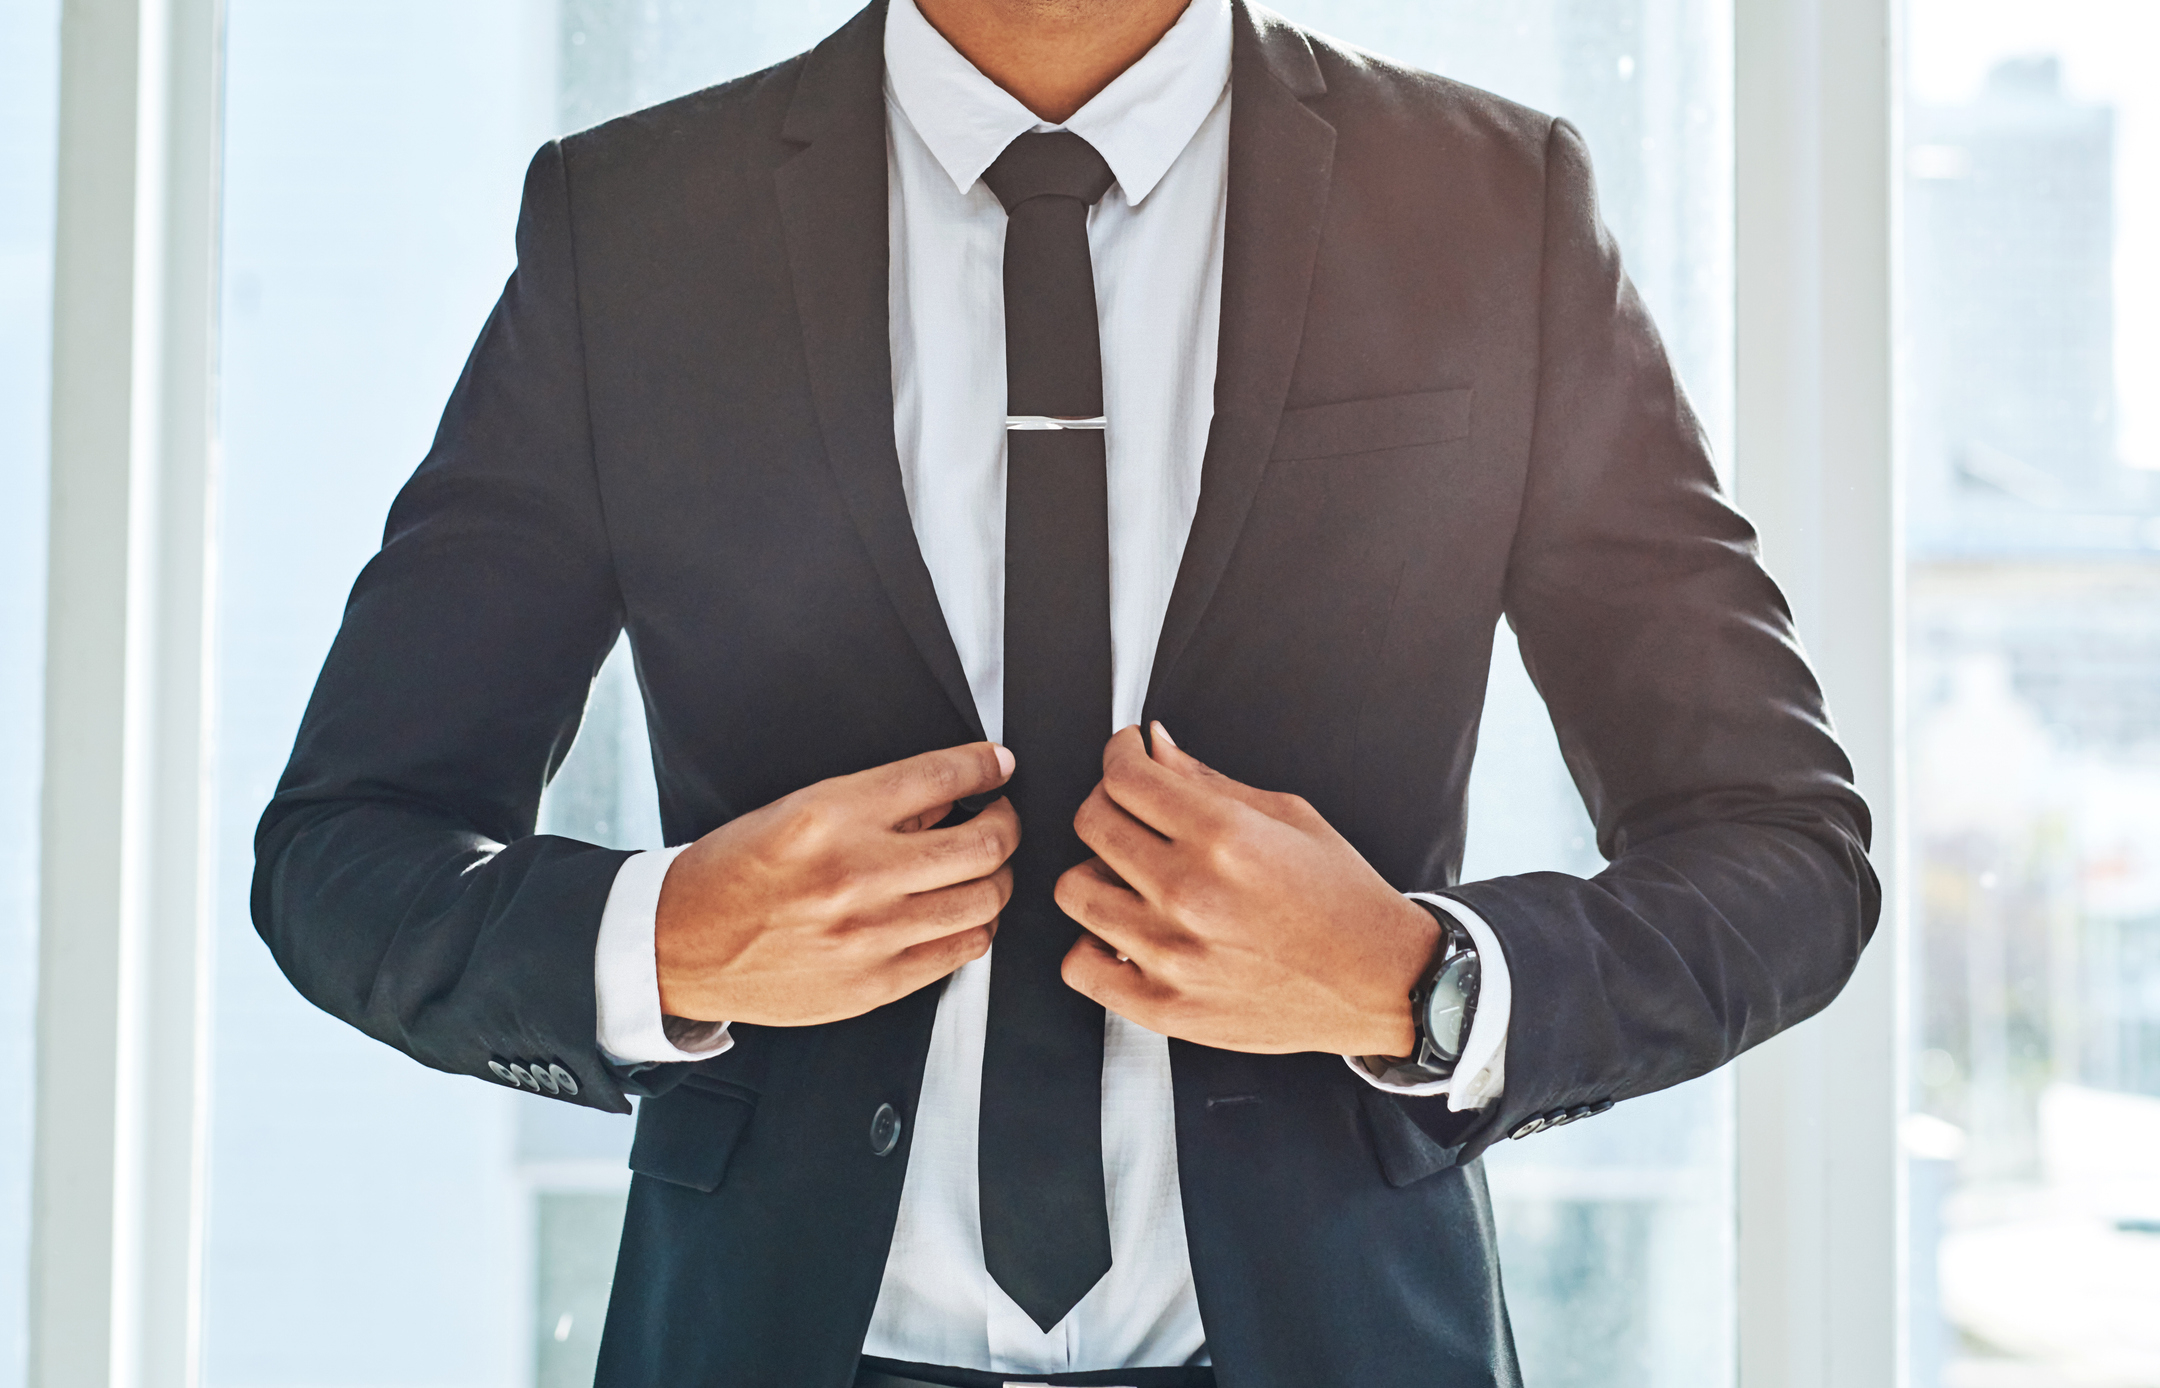 Professional in a suit adjusting tie, representing business attire for Work &amp;amp; Money article